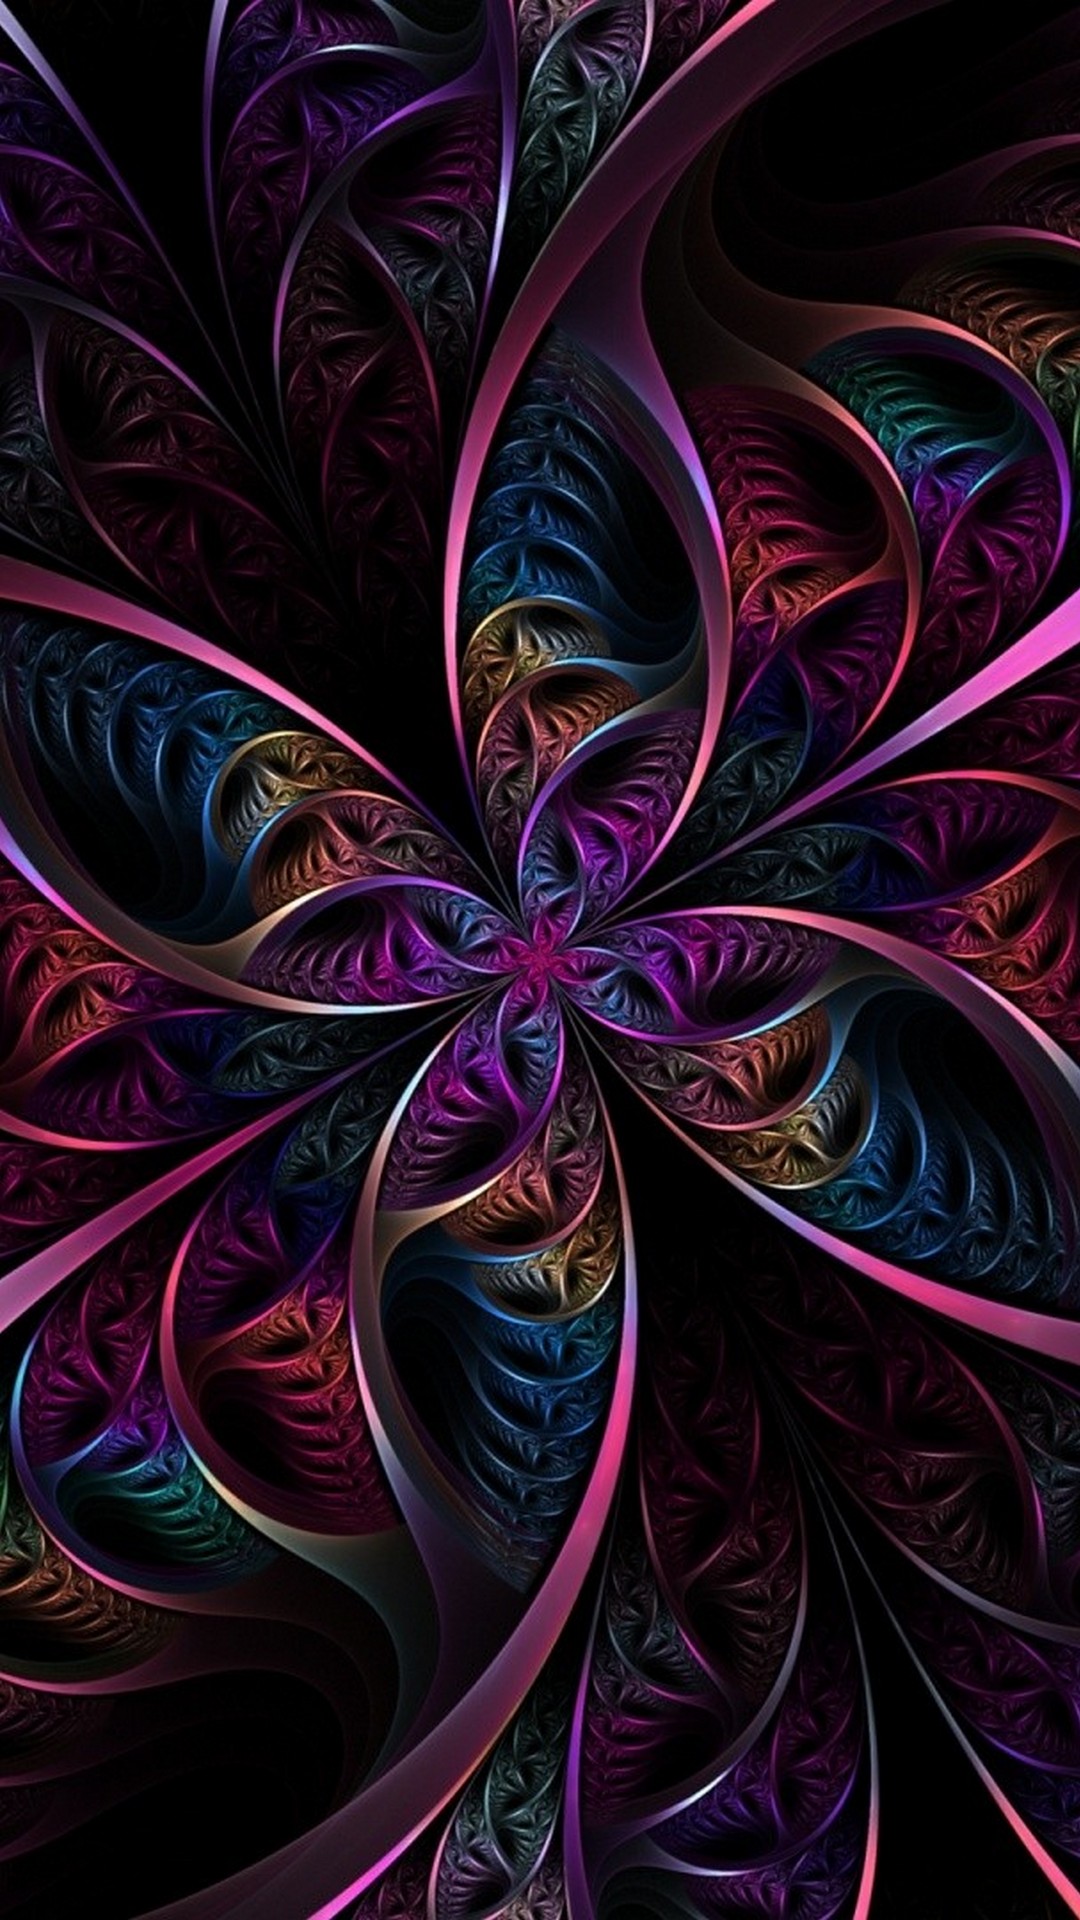 Psychedelic Art iPhone Wallpaper resolution 1080x1920